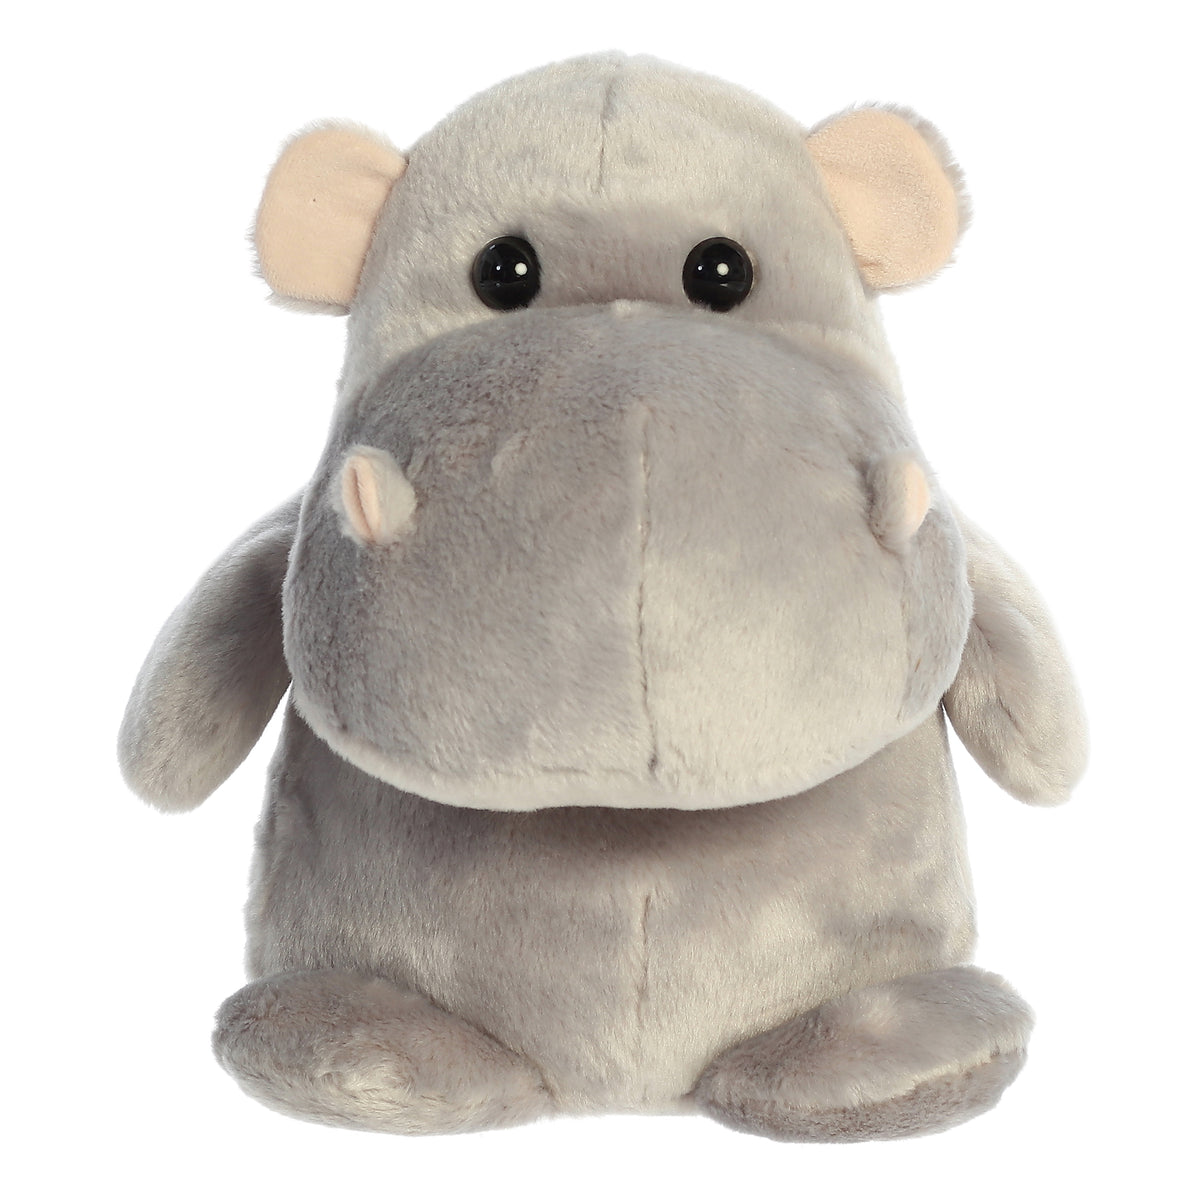 Hippo plush toy with a prominent snout, sporting a cozy light gray coat, and cute pale hippo plush ears.